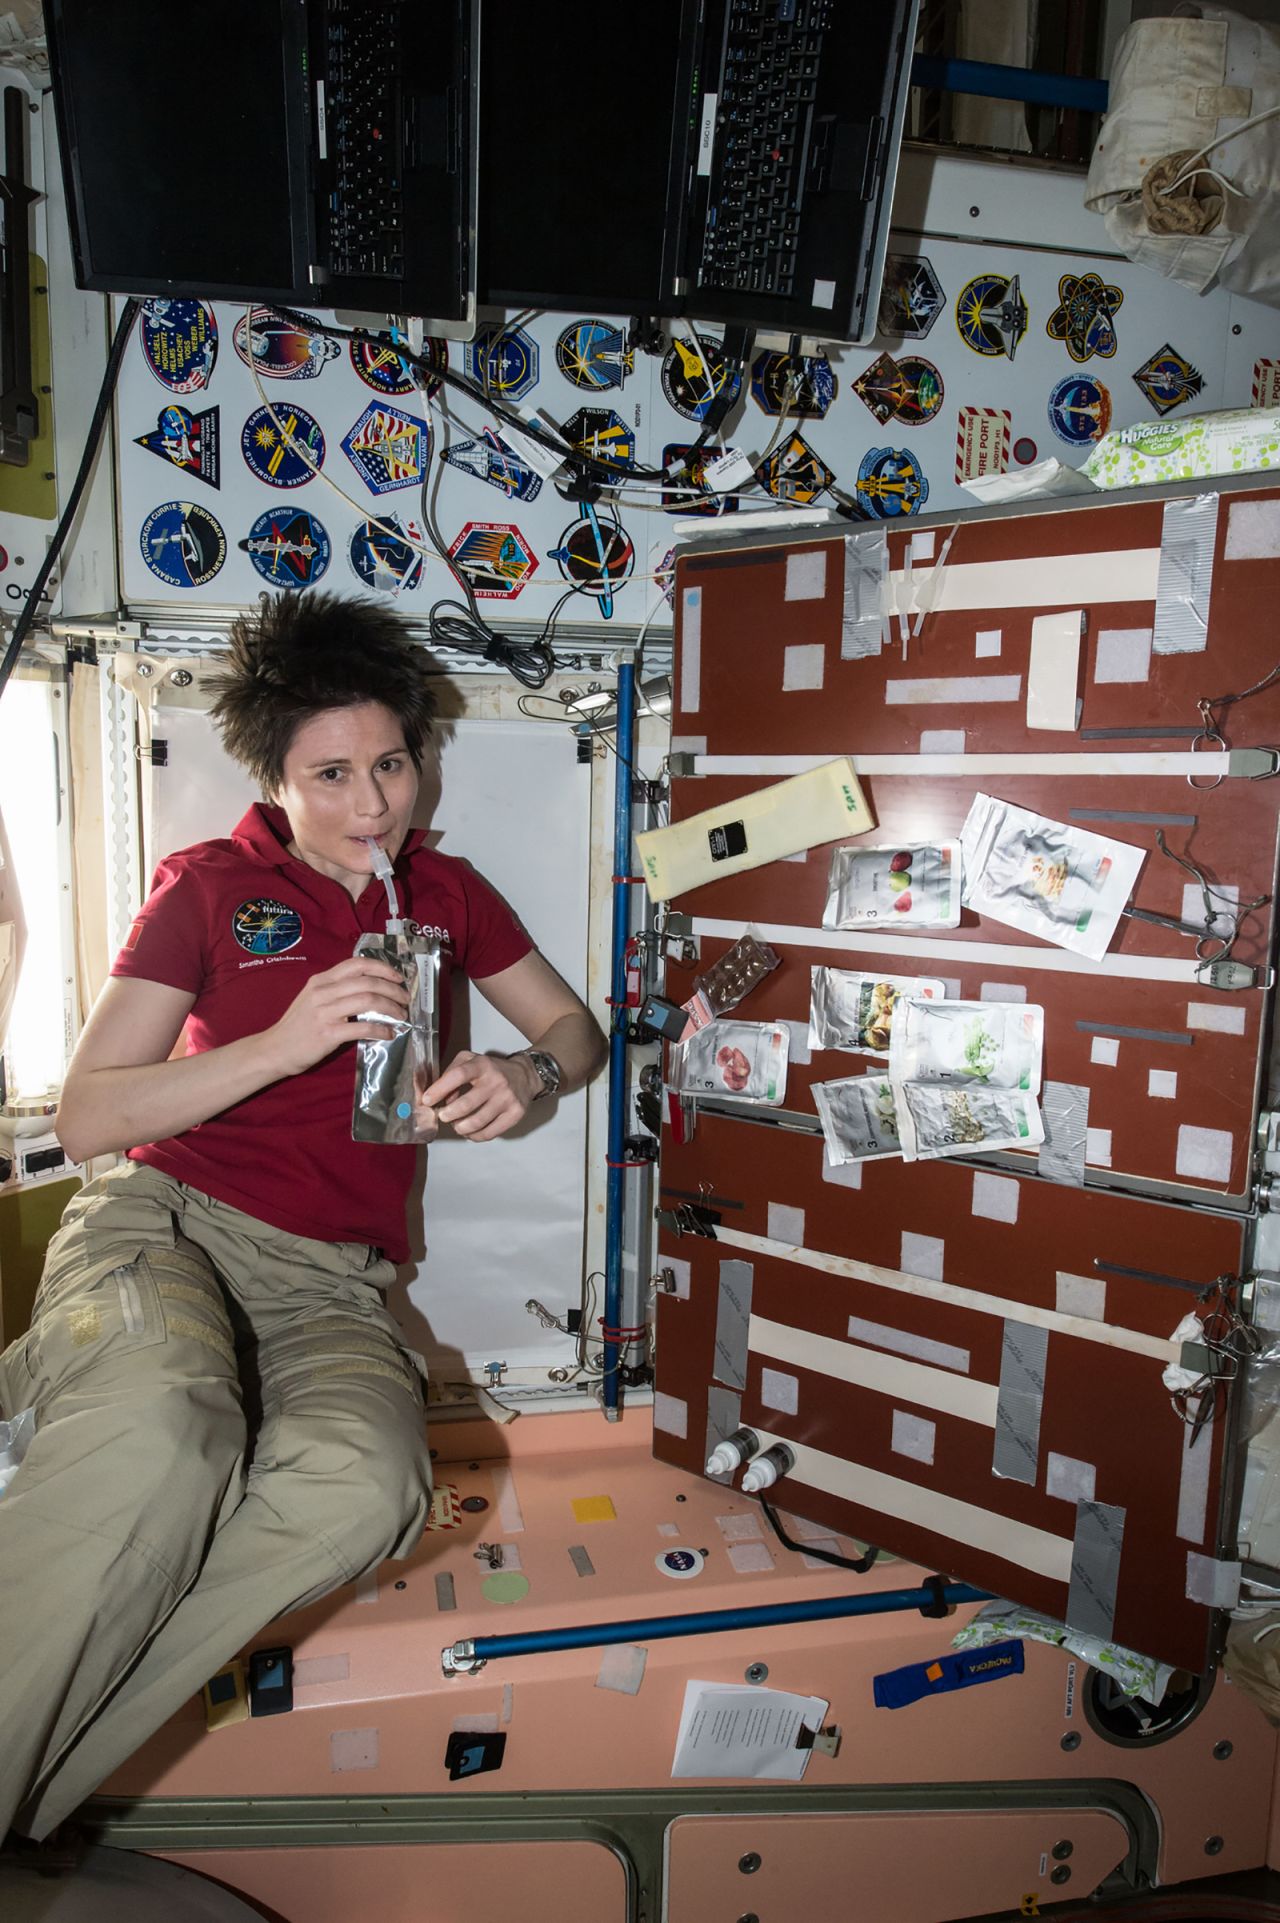 European Space Agency astronaut Samantha Cristoforetti is seen taking a drink in the Unity module aboard the International Space Station, April 27, 2015. The crew's food galley is located in Unity; several food packets are visible to the right.